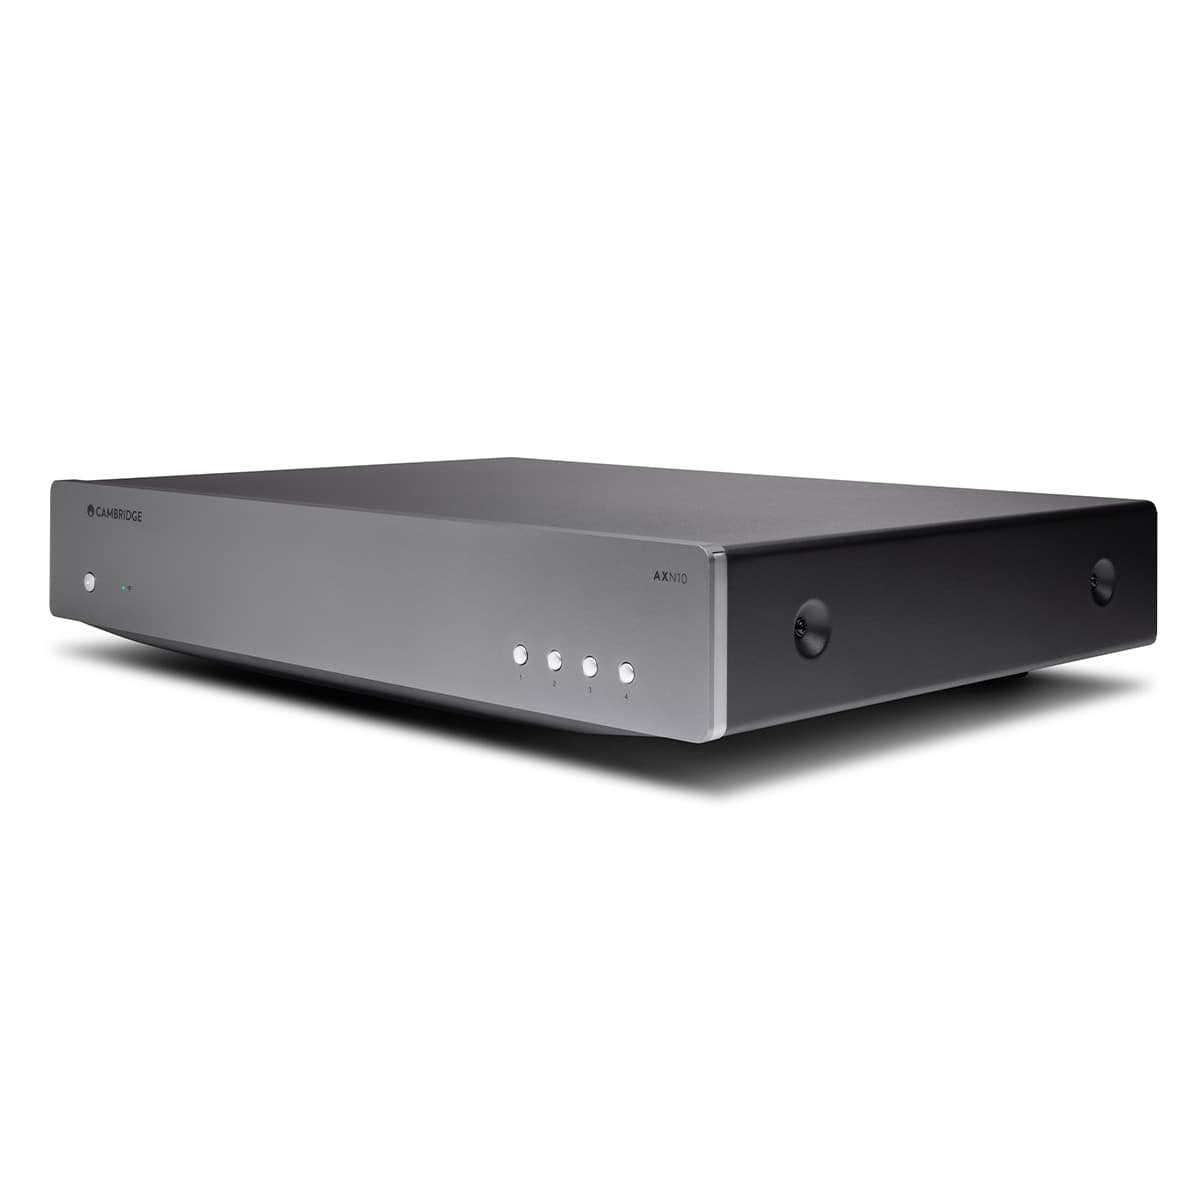 AXN10 Network Player with Bluetooth, Built-In DAC, & Roon Ready